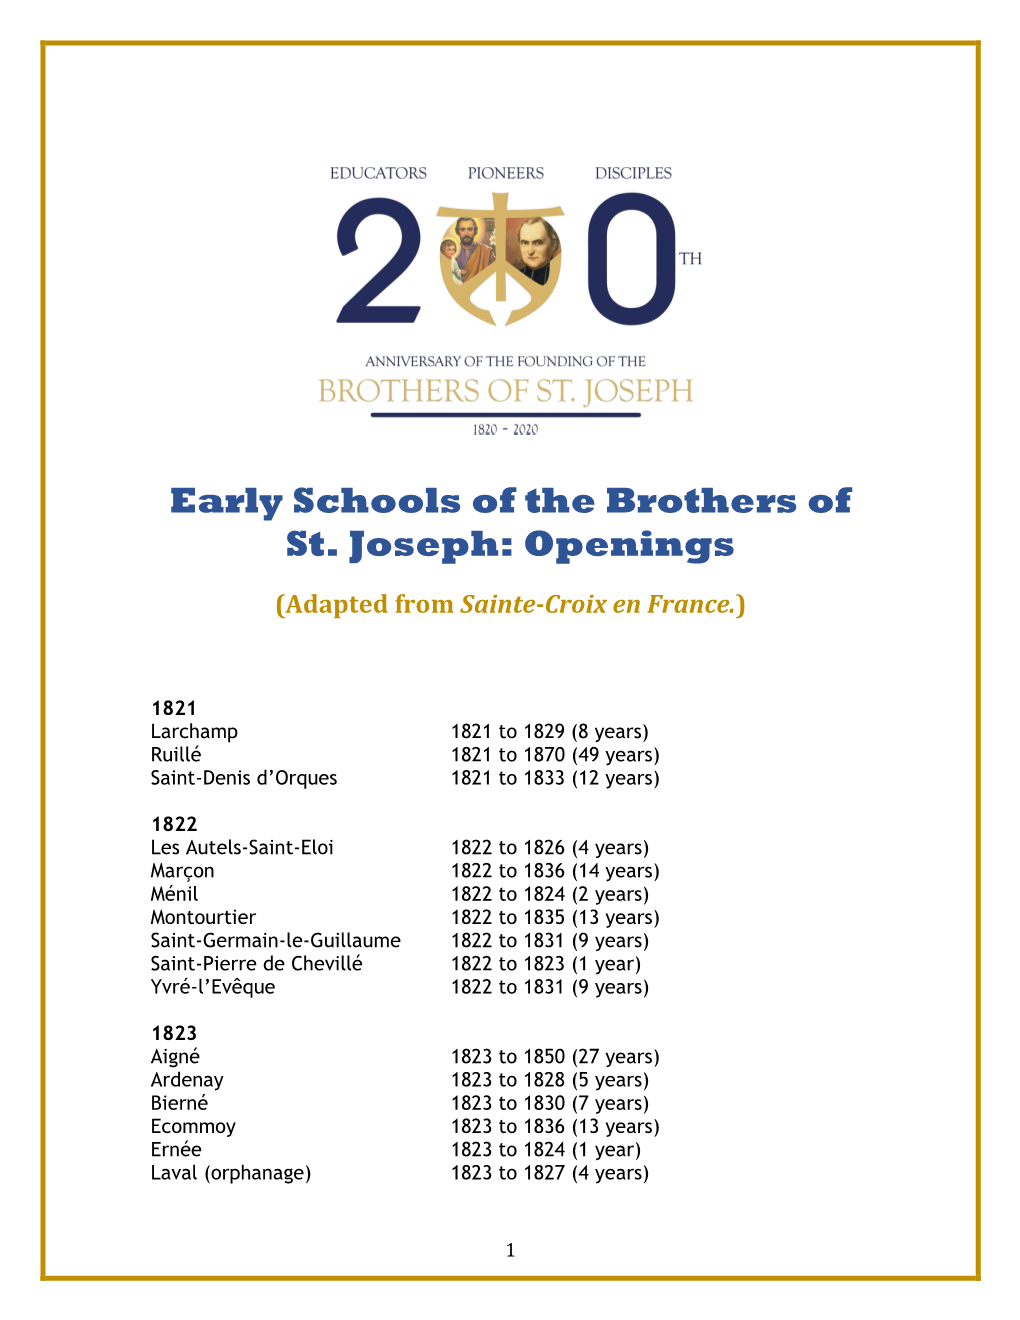 Early Schools of the Brothers of St. Joseph: Openings